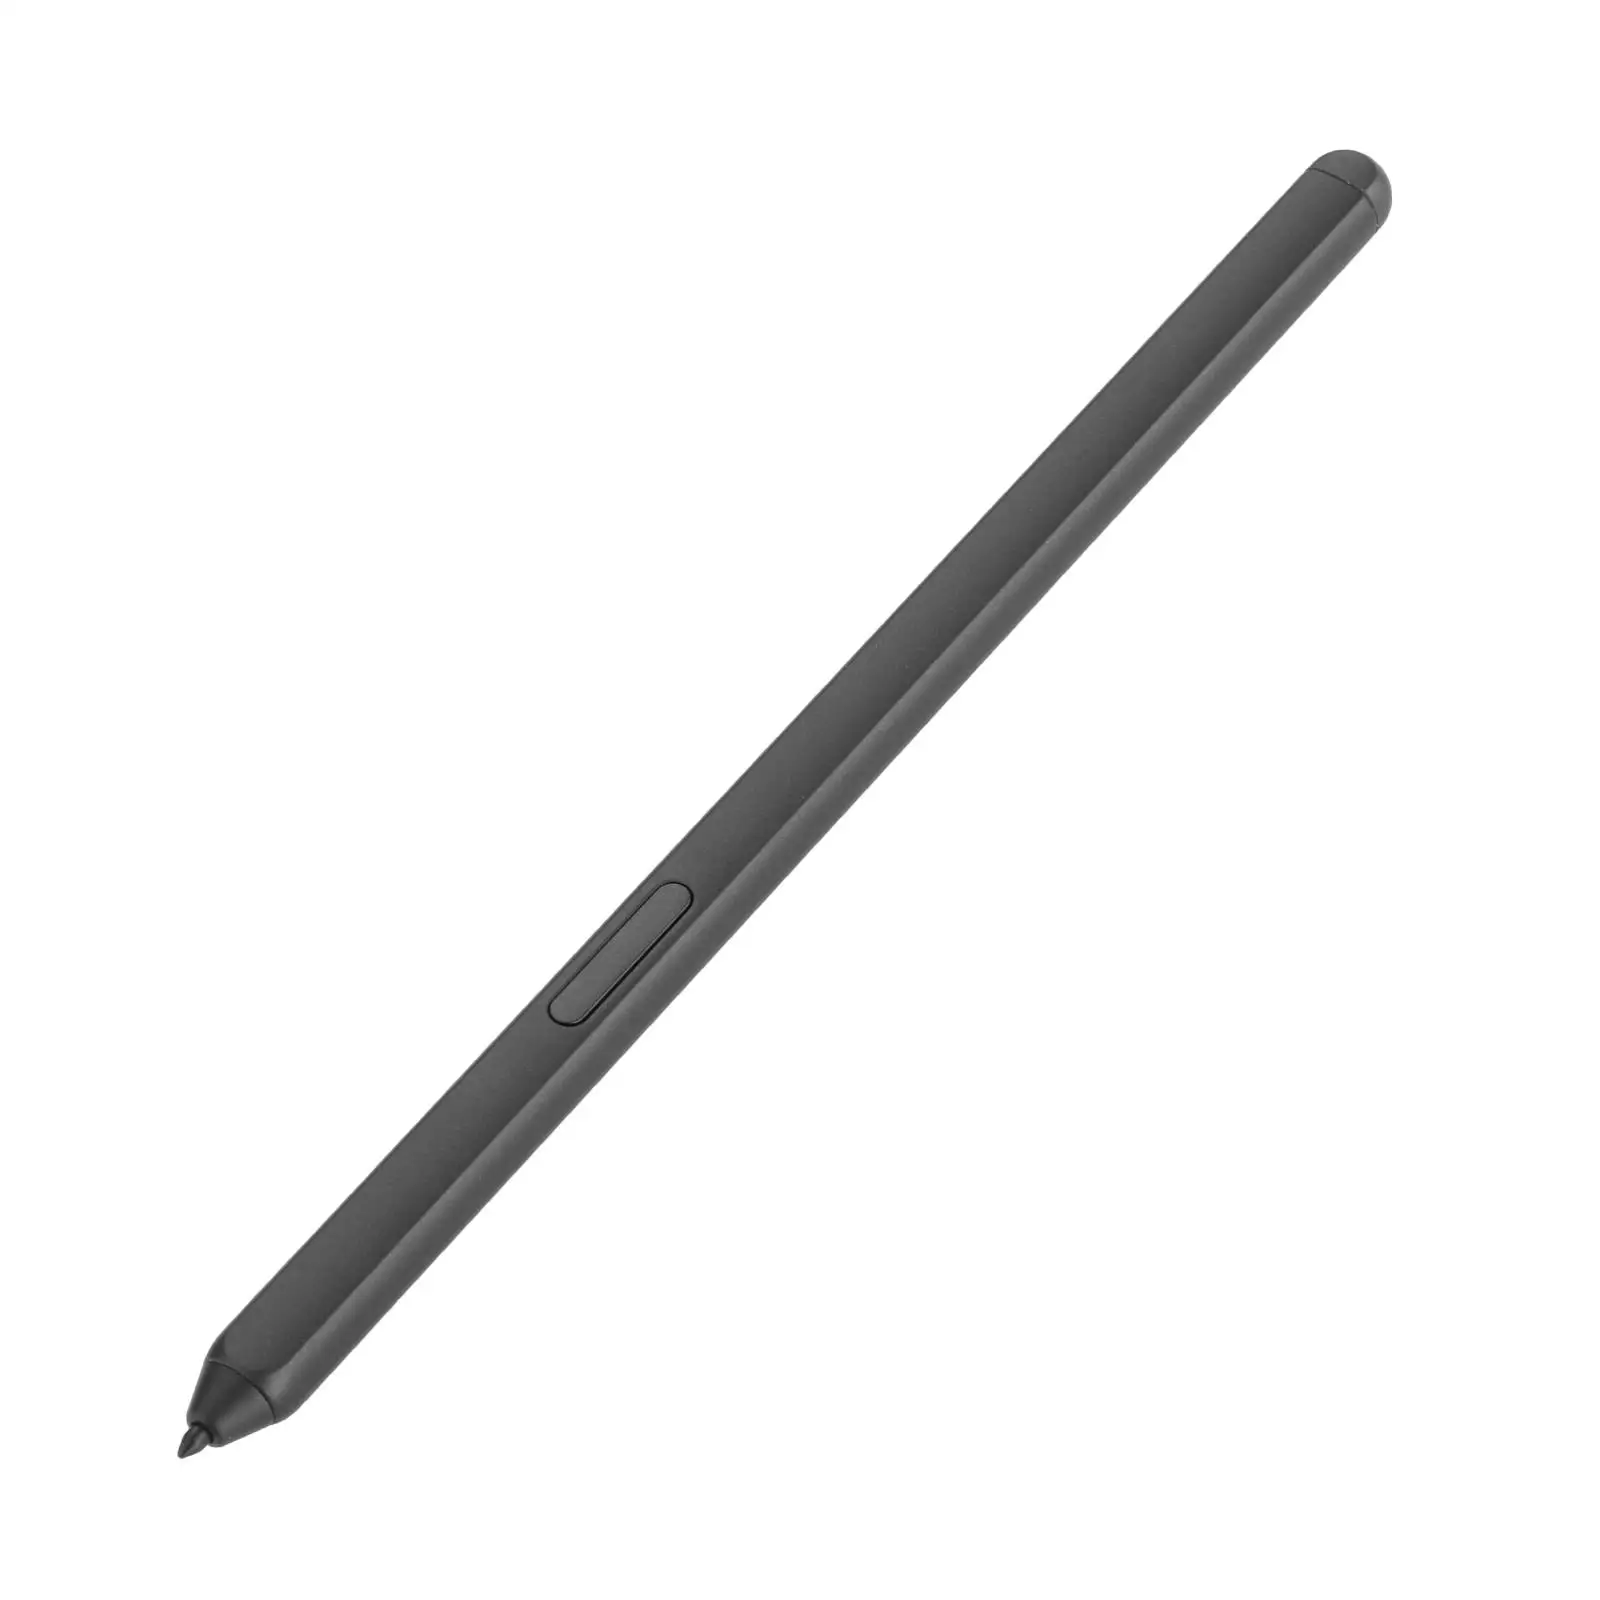 Stylus S-pen, Suitable for S21/S21 5G Electromagnetic Pen, Mobile Phone Screen Stylus, Soft Head Natural Grip for Writing